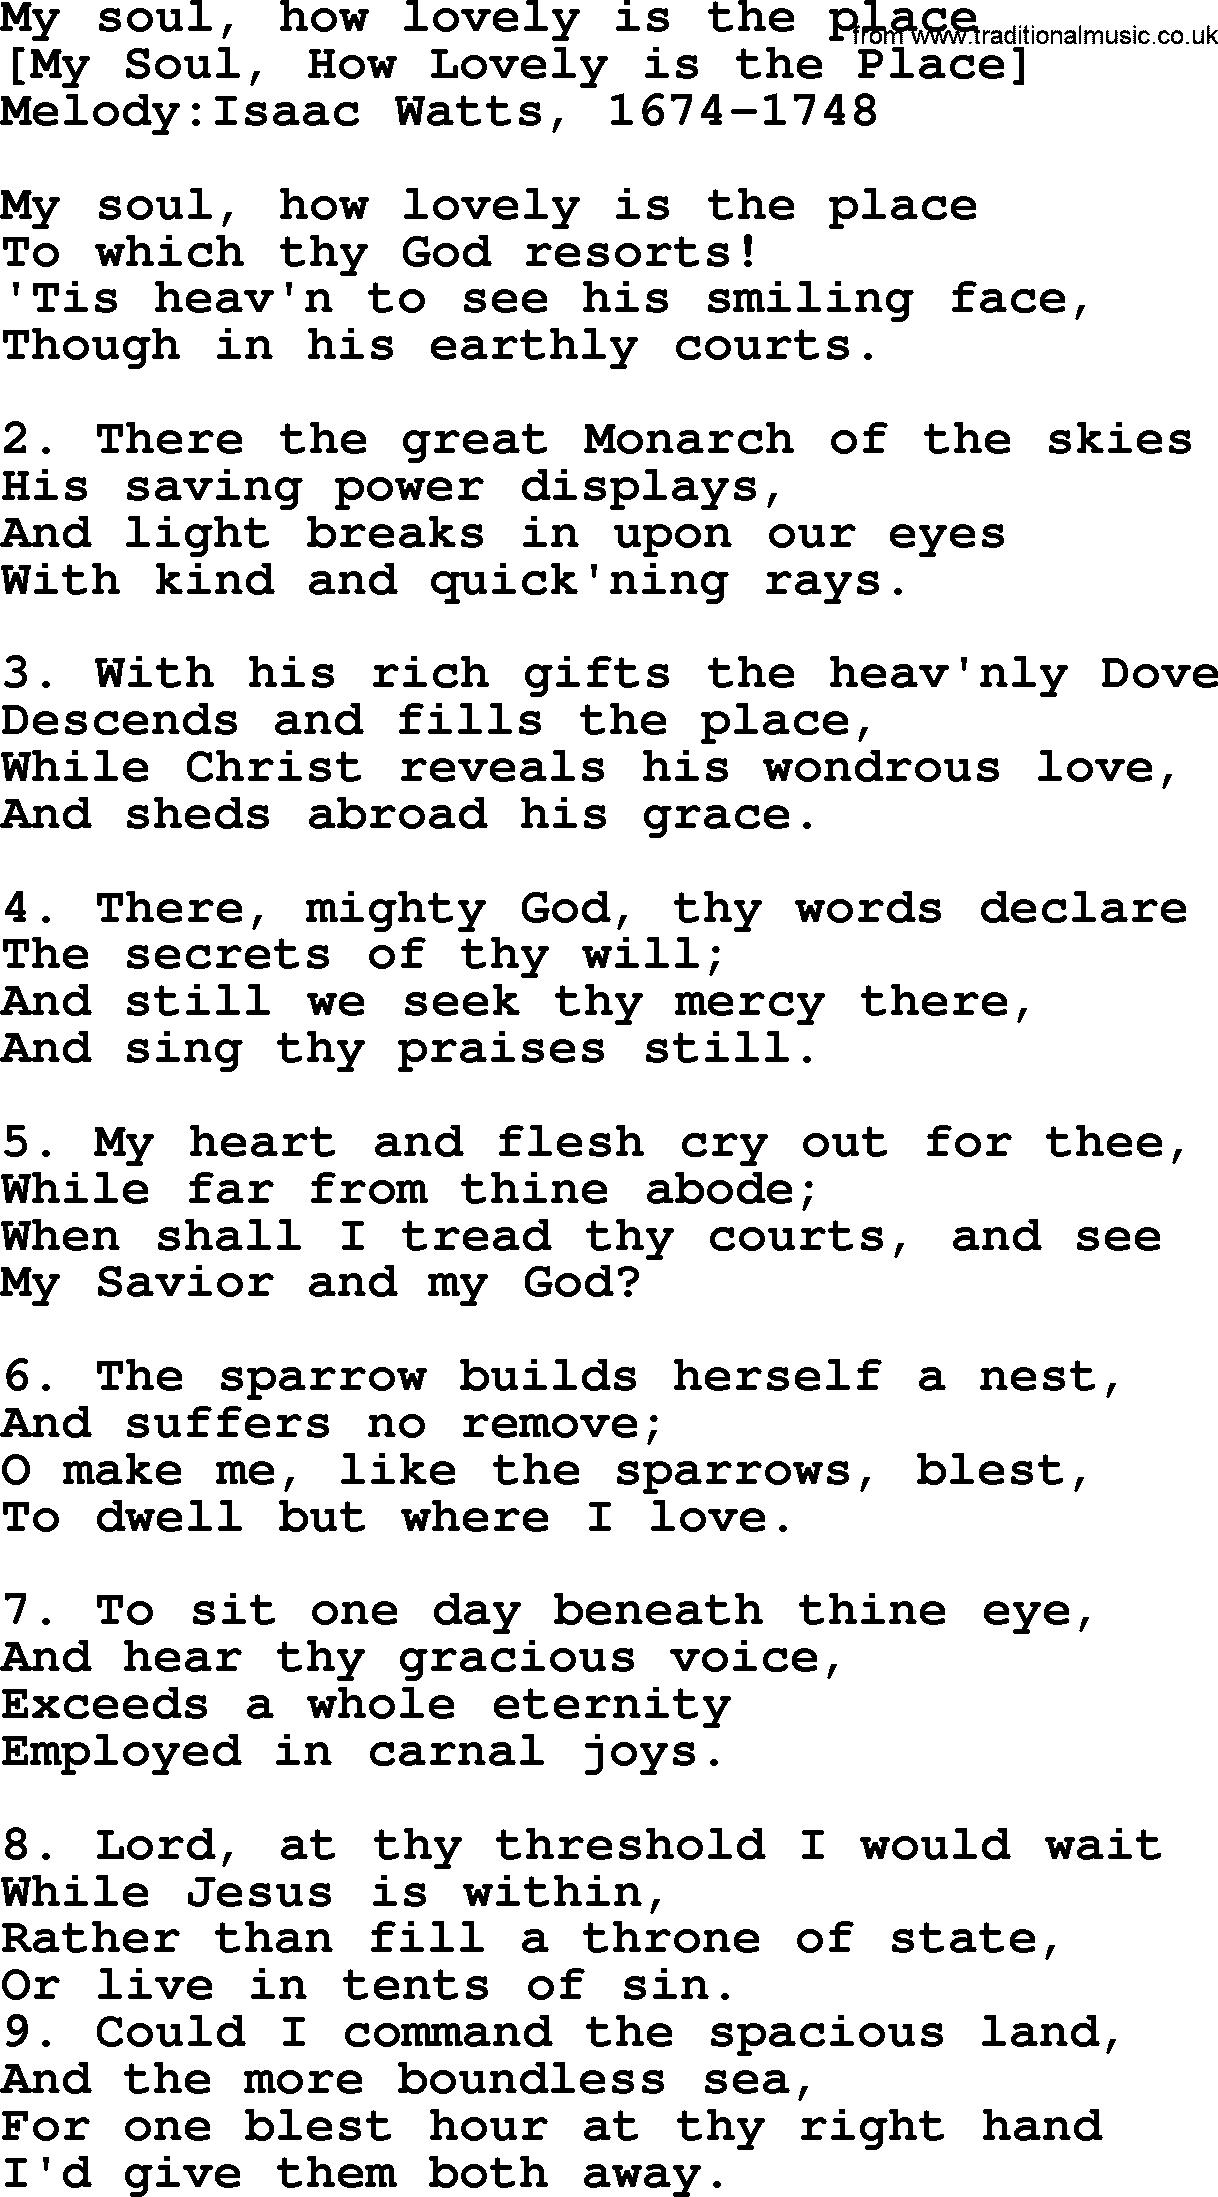 Old English Song: My Soul, How Lovely Is The Place lyrics